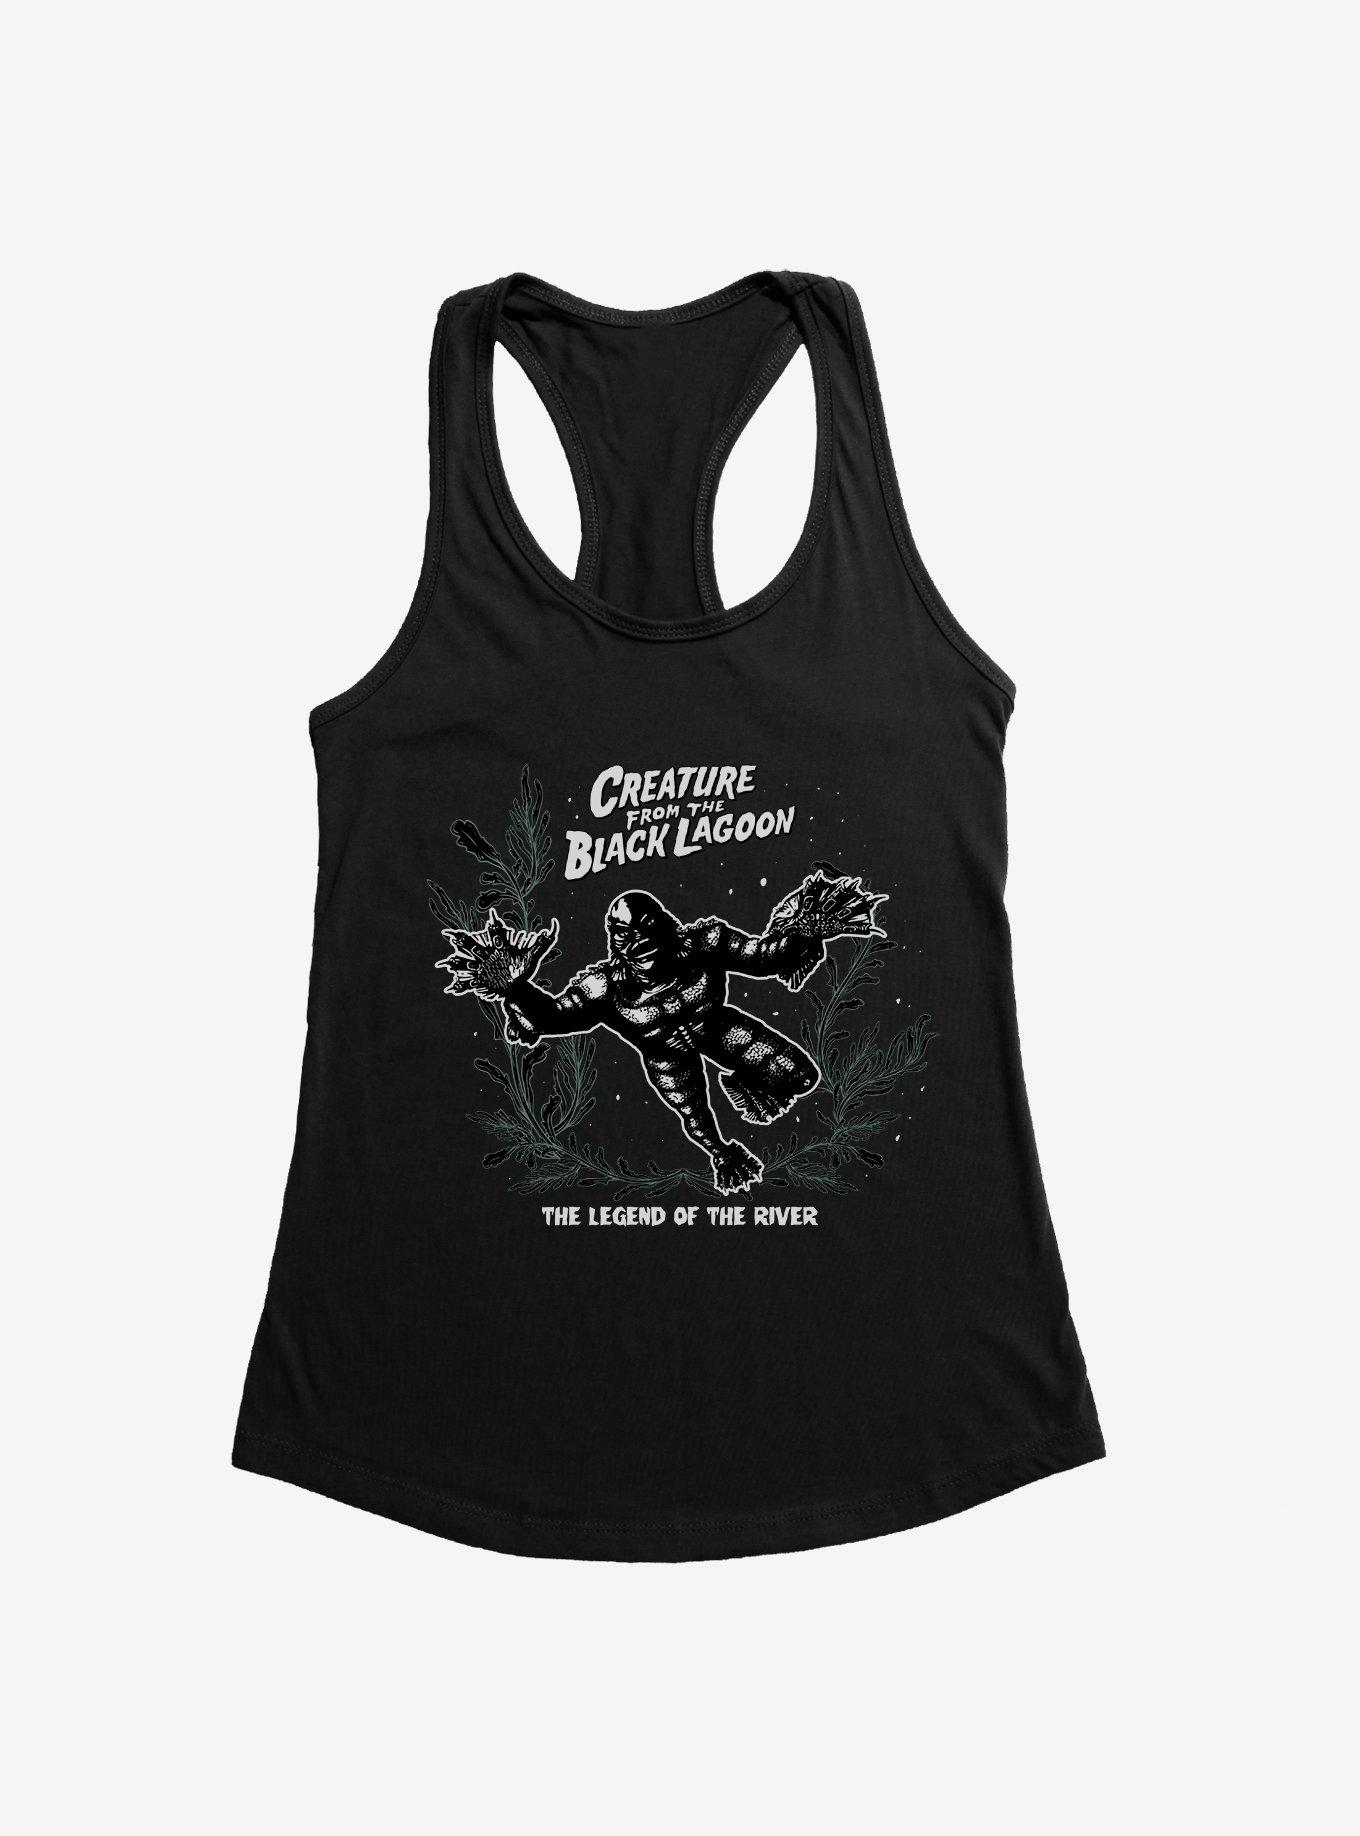 Creature From The Black Lagoon Legend Of The River Girls Tank, BLACK, hi-res